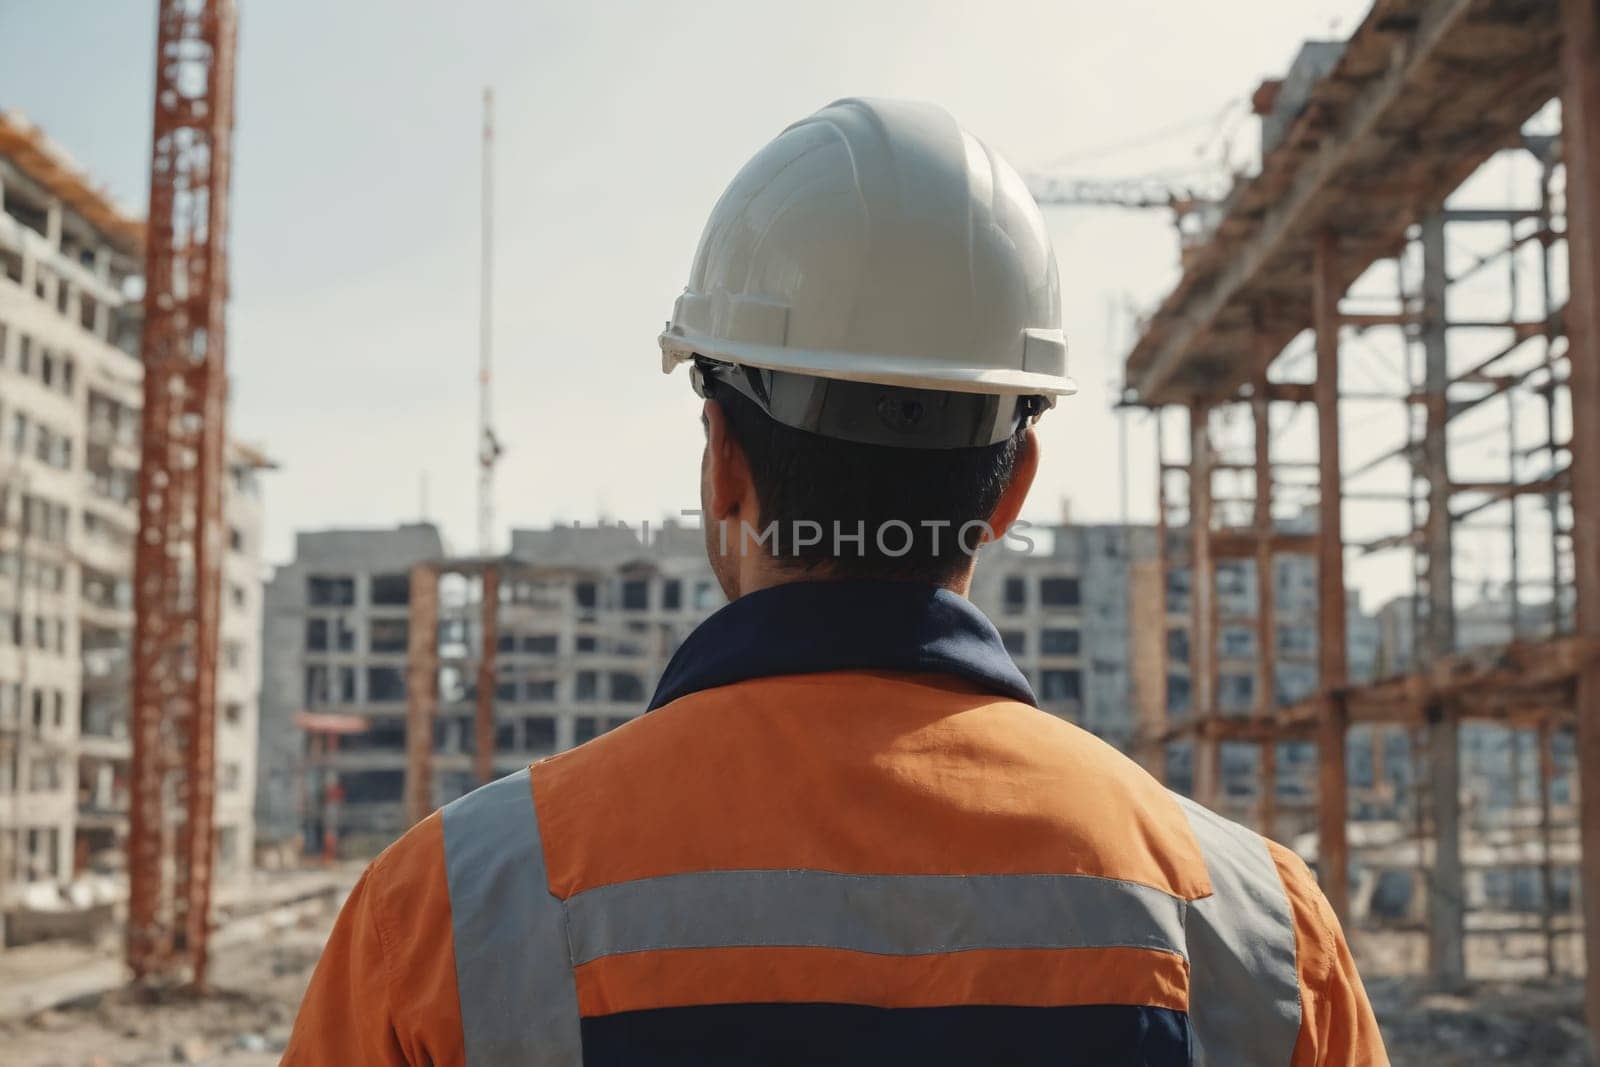 A peek into industrial life through the portrait of a construction worker donned in a visible yellow hard hat, captured amidst the billows of construction, standing as a testament to enduring workmanship.